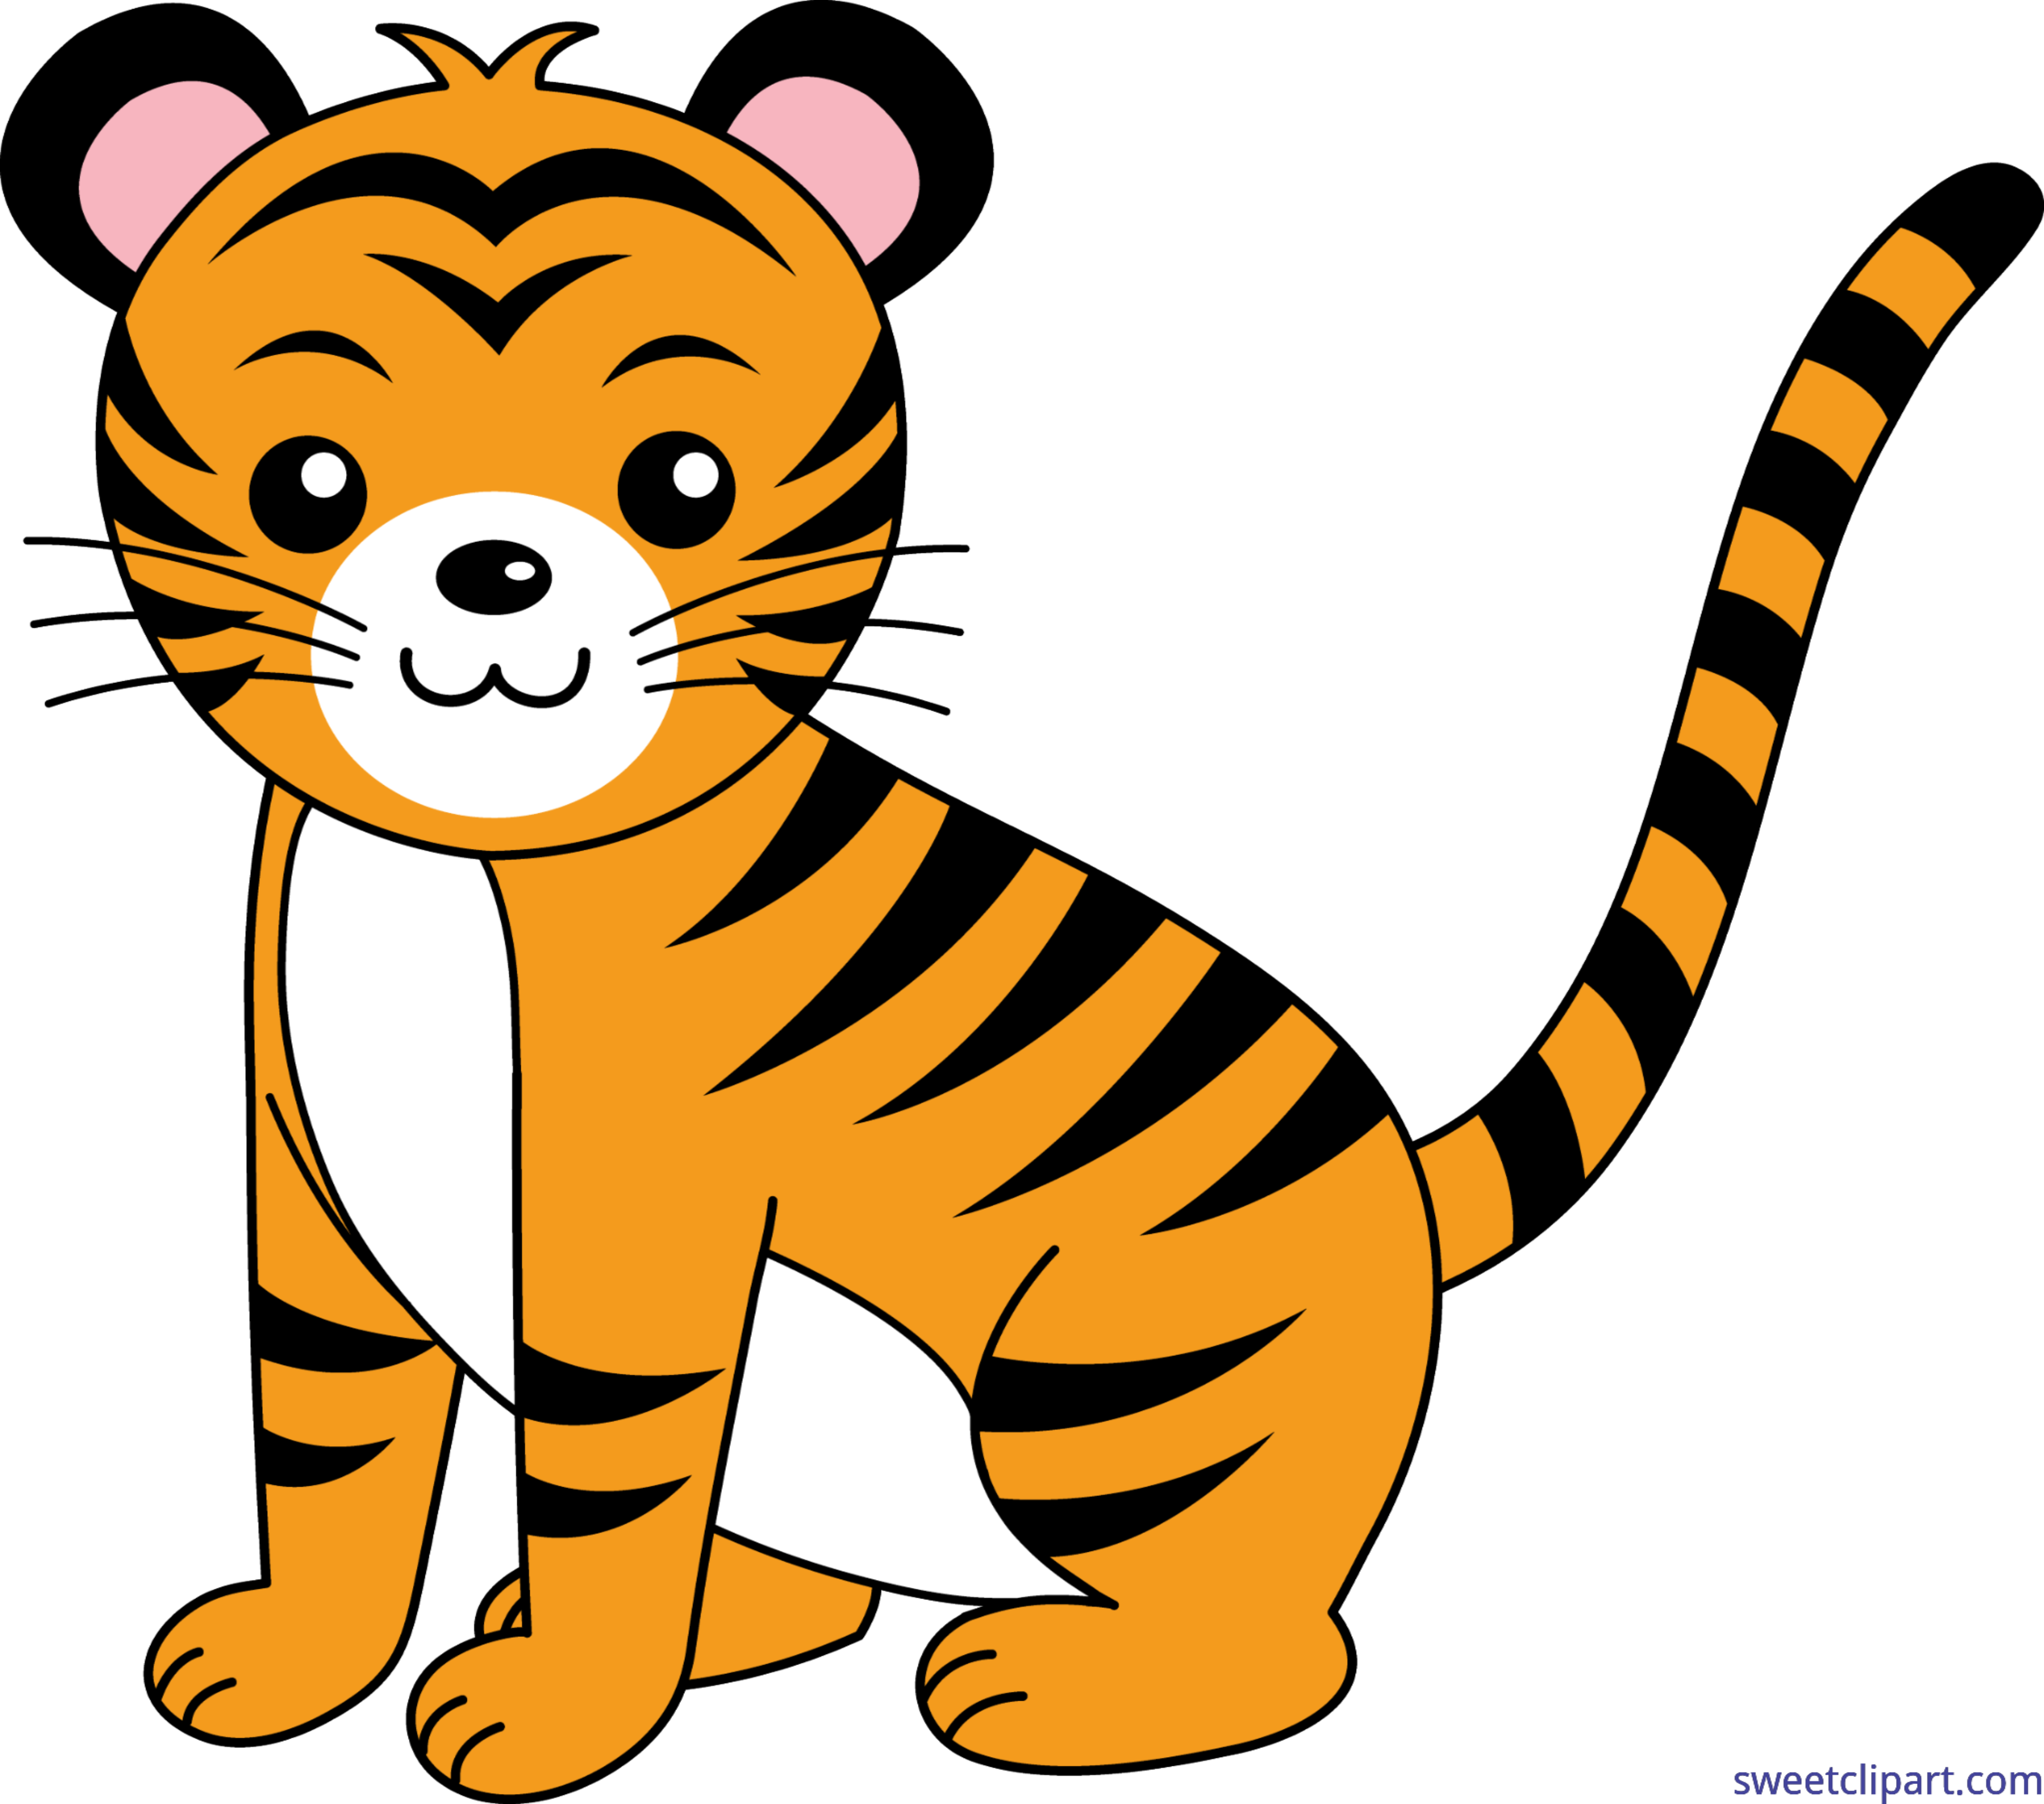 Email clipart design cute. Tiger clip art sweet